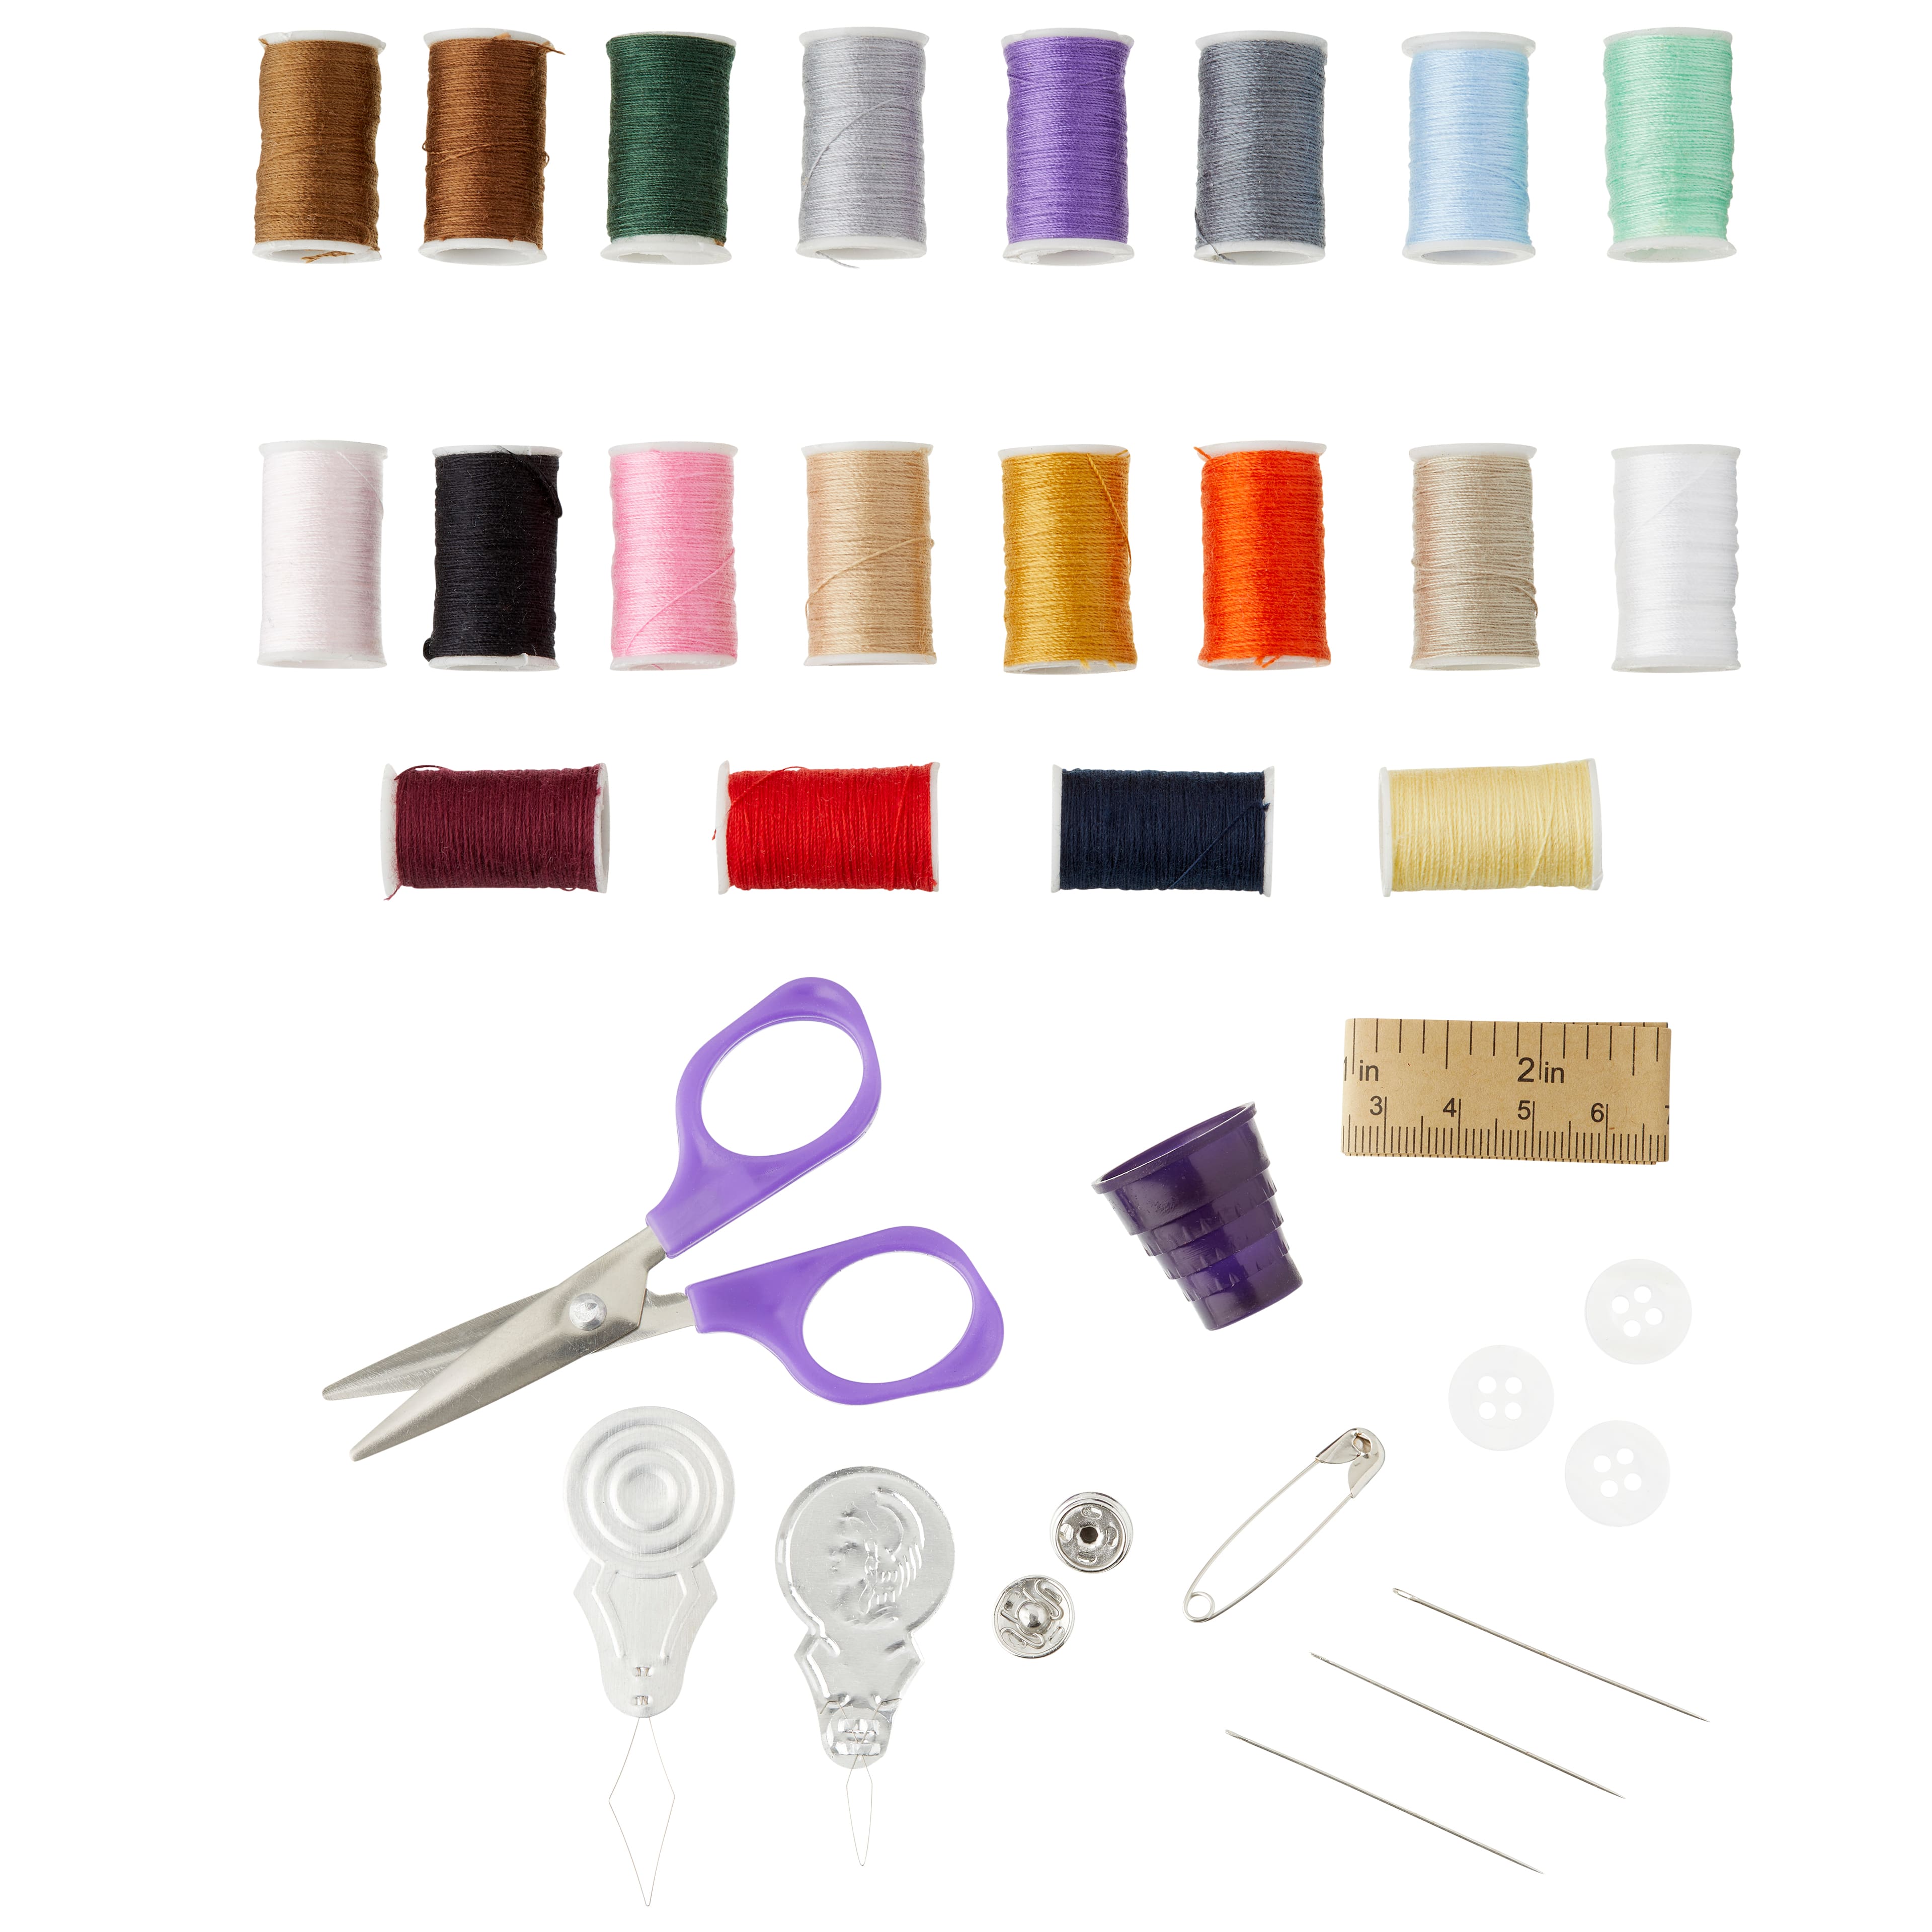 10 Must Have Sewing Tools For Your Studio - The Sewing Loft